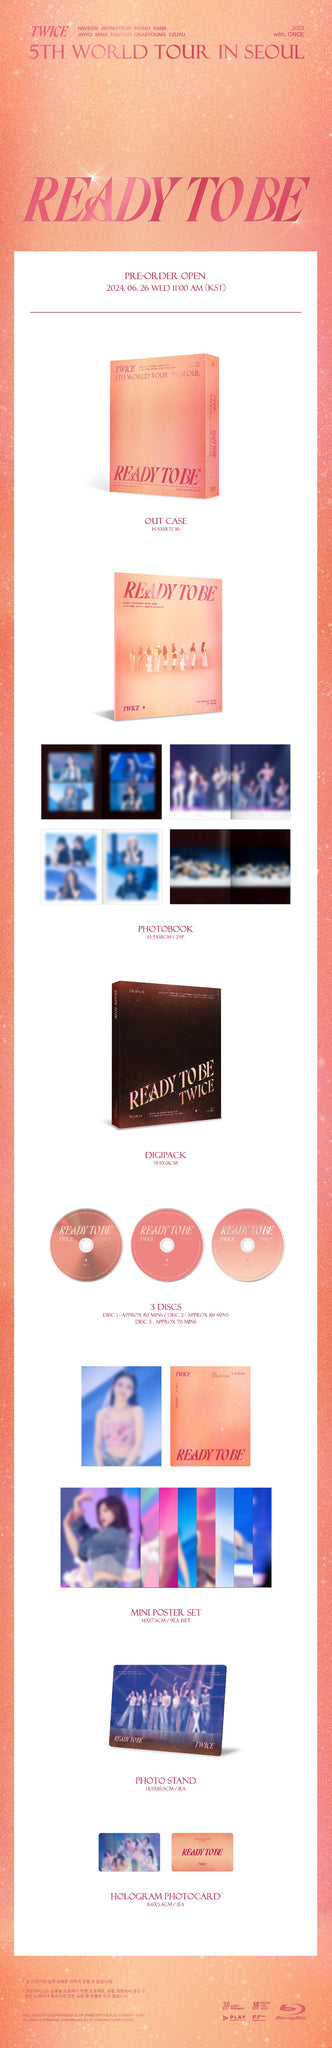 TWICE 5TH WORLD TOUR [READY TO BE] IN SEOUL Blu-ray